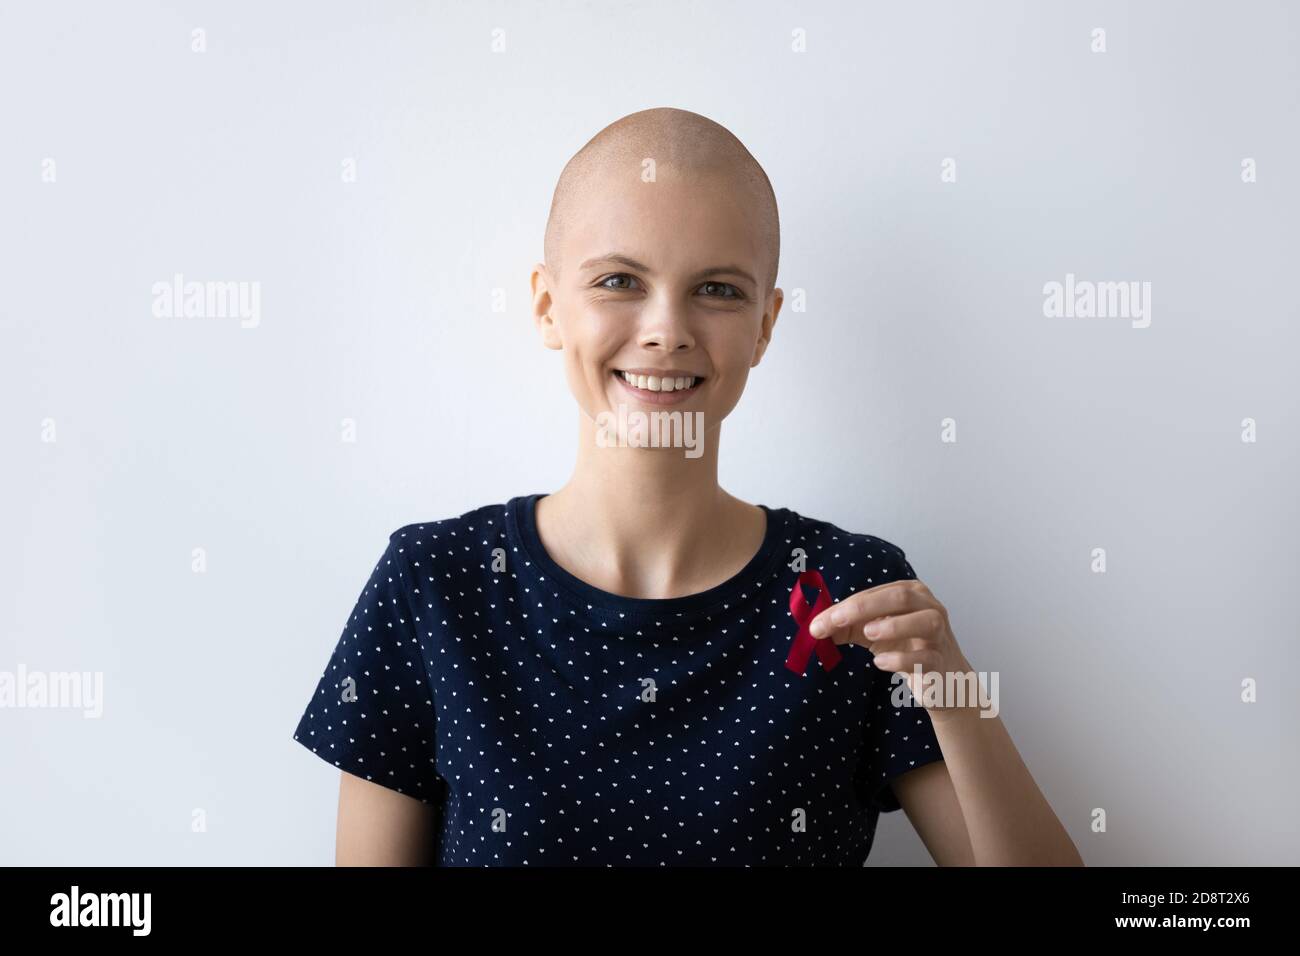 Head shot portrait smiling hairless woman holding awareness red ribbon Stock Photo